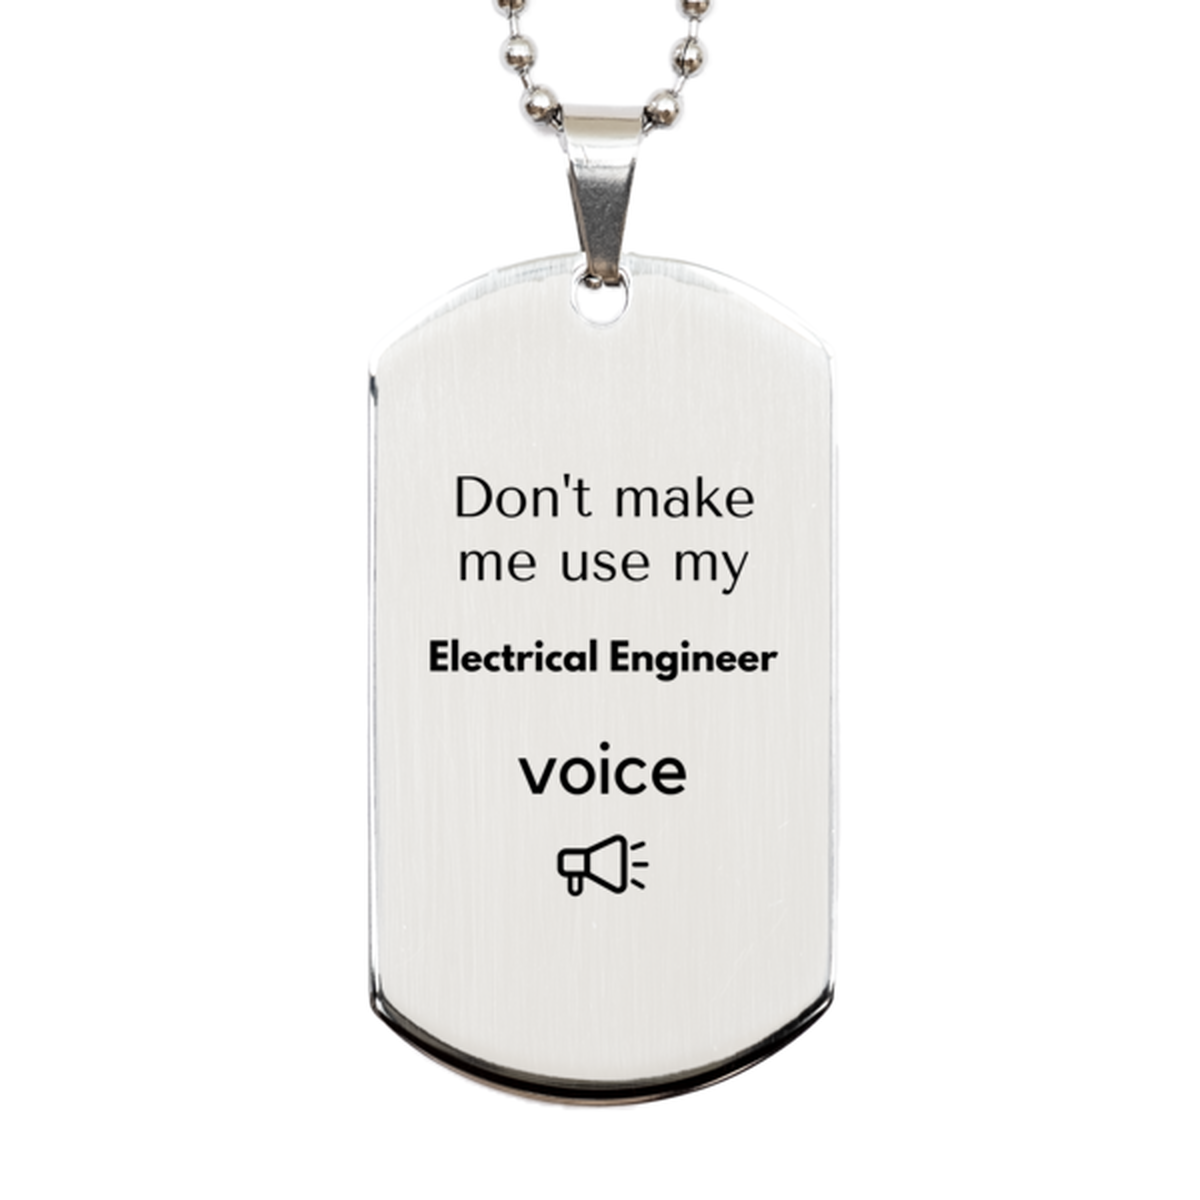 Don't make me use my Electrical Engineer voice, Sarcasm Electrical Engineer Gifts, Christmas Electrical Engineer Silver Dog Tag Birthday Unique Gifts For Electrical Engineer Coworkers, Men, Women, Colleague, Friends